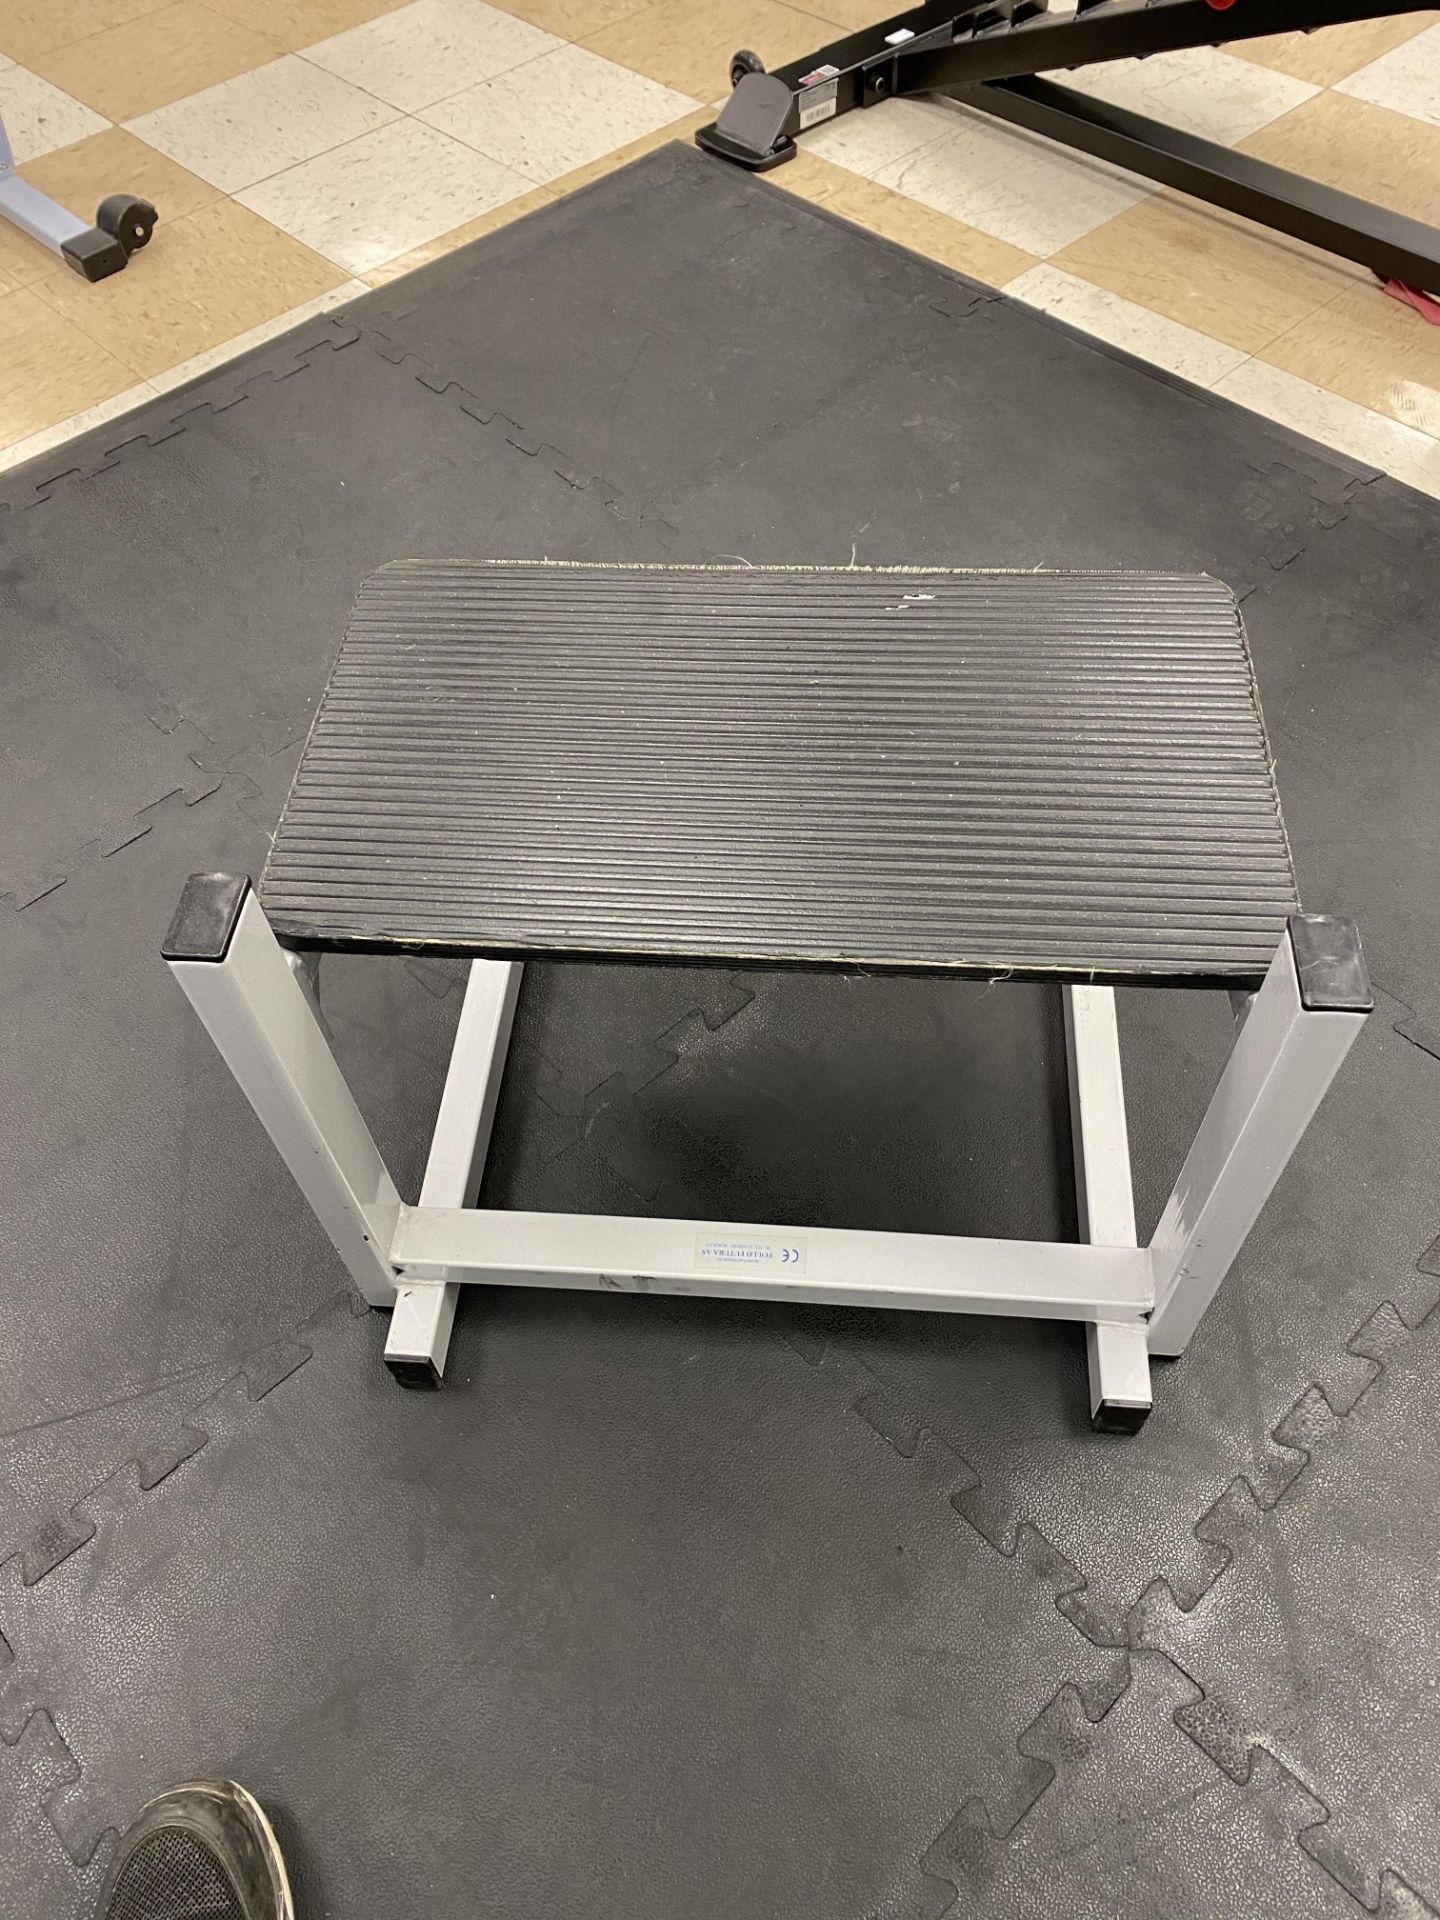 2 Follo Futura adjustable height step up benches. 560mm x 500mm x 410mm high. - Image 3 of 6